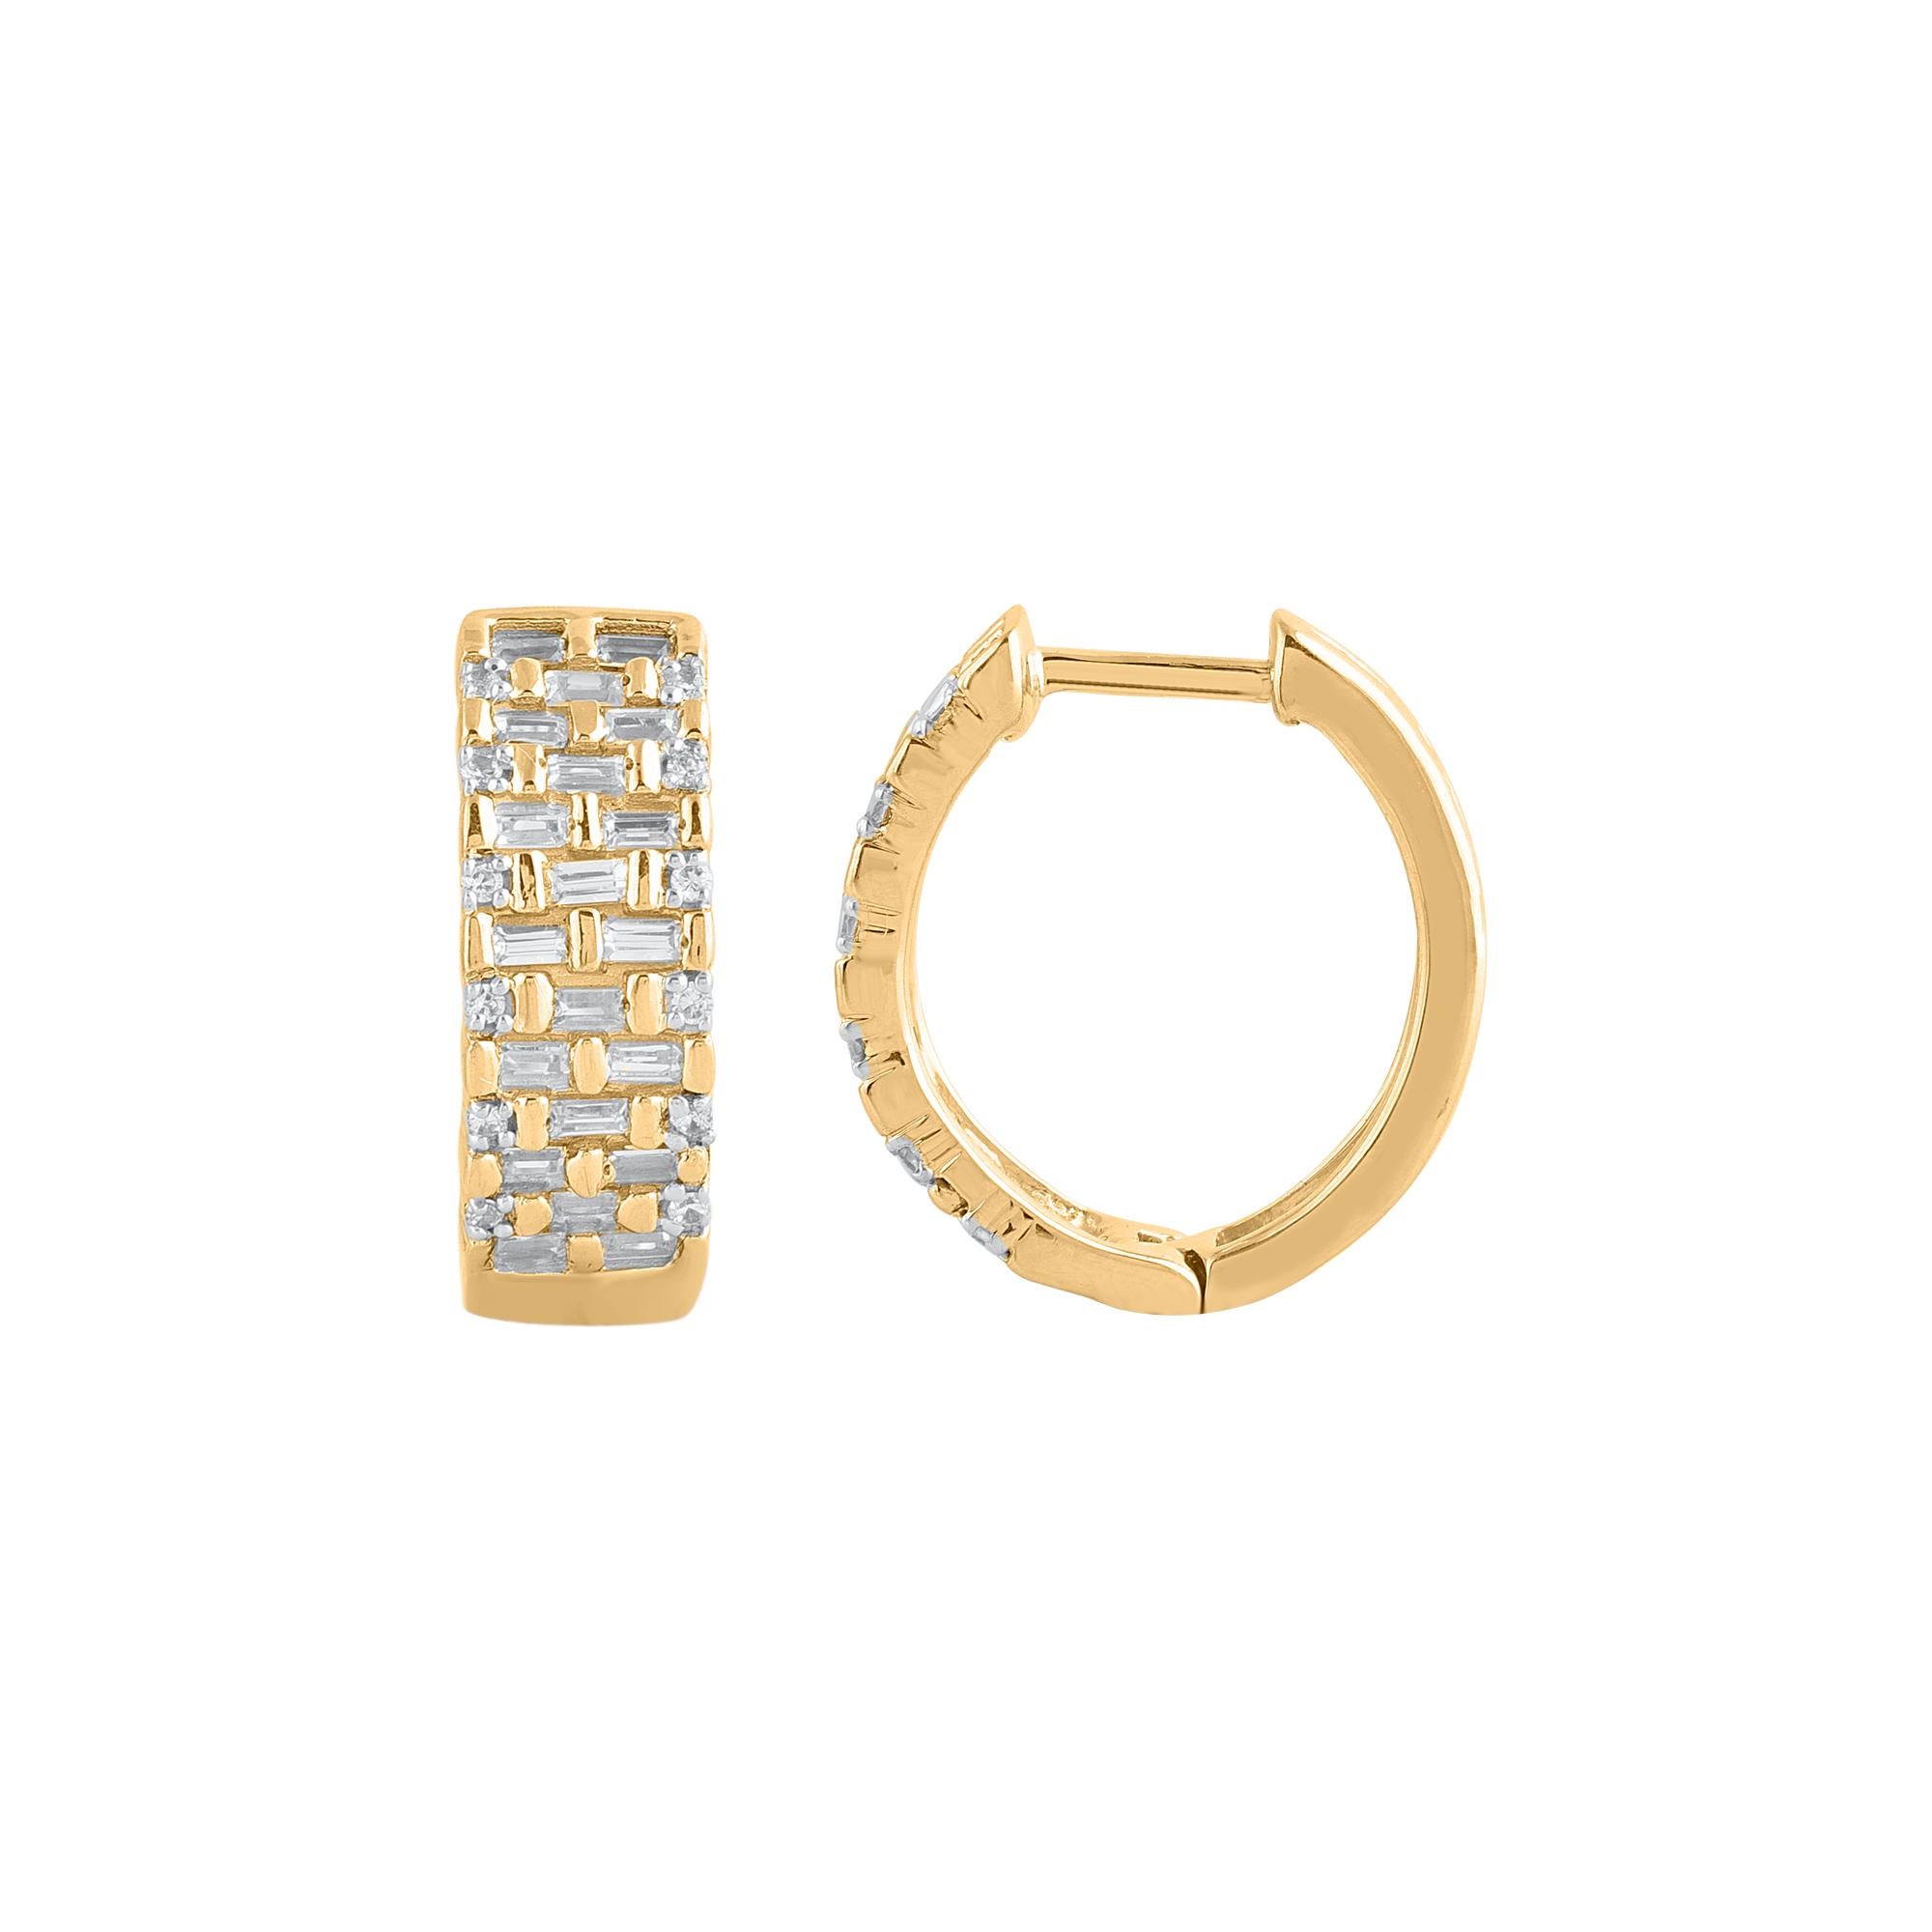 Perfect your weekend looks when you wear these stylish diamond hoop earrings. Crafted in 14 karat yellow gold with 64 brilliant cut & baguette diamond in pave & channel setting. Total diamond weight is 0.75 carat. These earrings secure with hinged